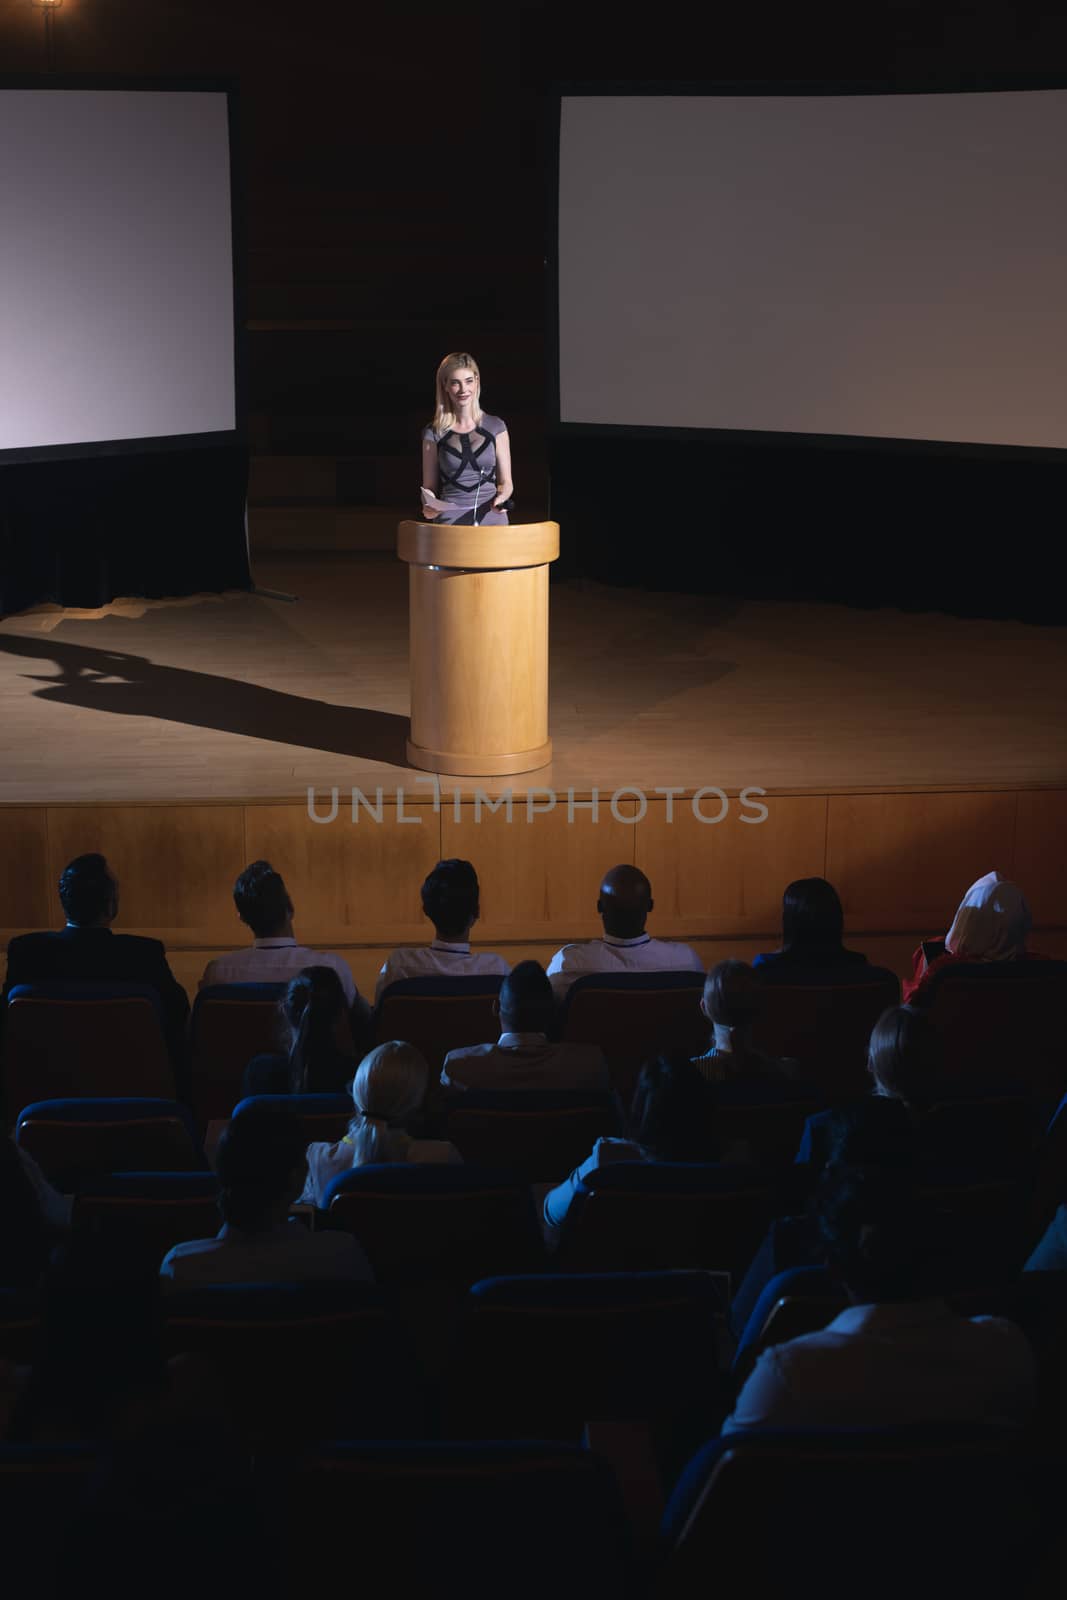 High view of blonde Caucasian businesswoman standing around podium and giving presentation to the audience in auditorium